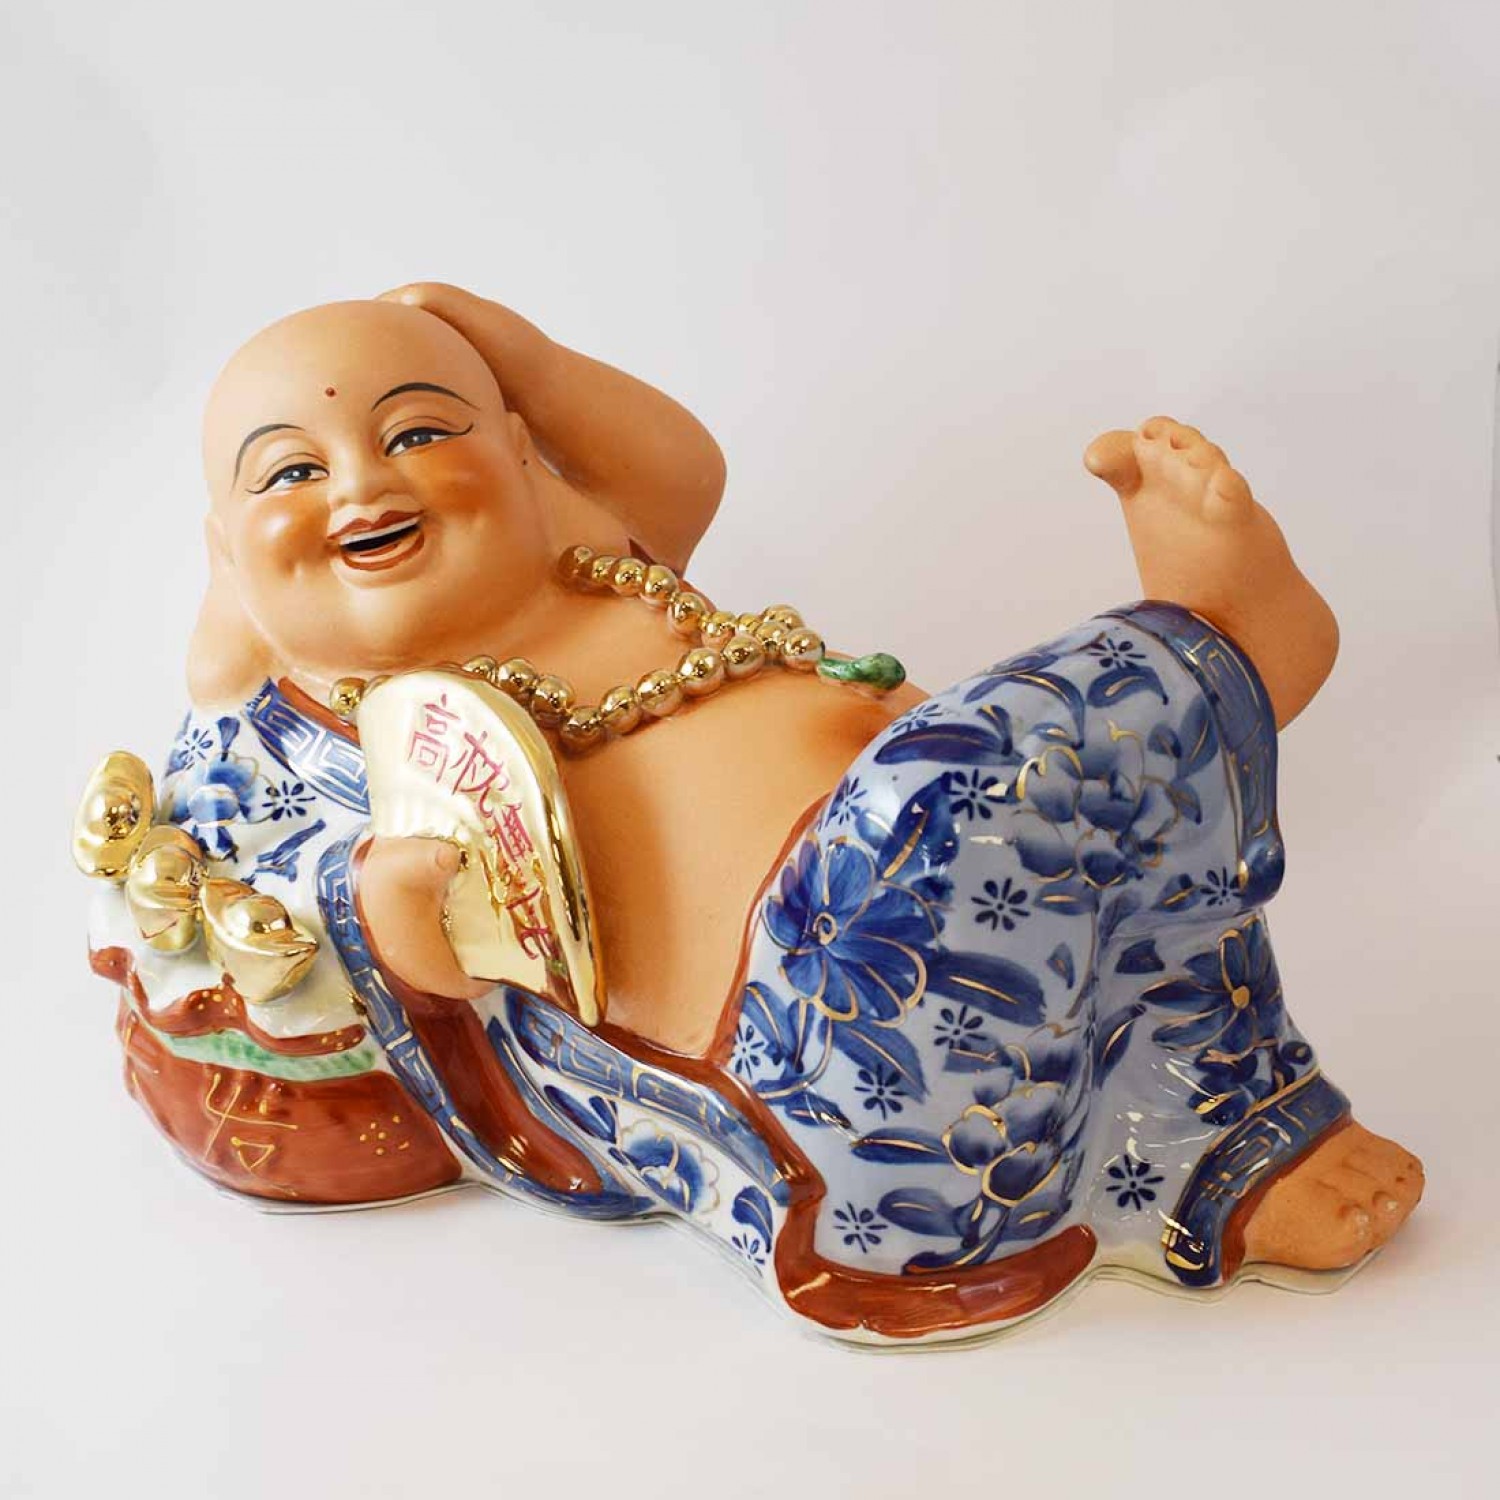 Big Size Porcelain Laughing Buddha in Blue robe with Fan and Ingot Lying on Wealth Bag Gold